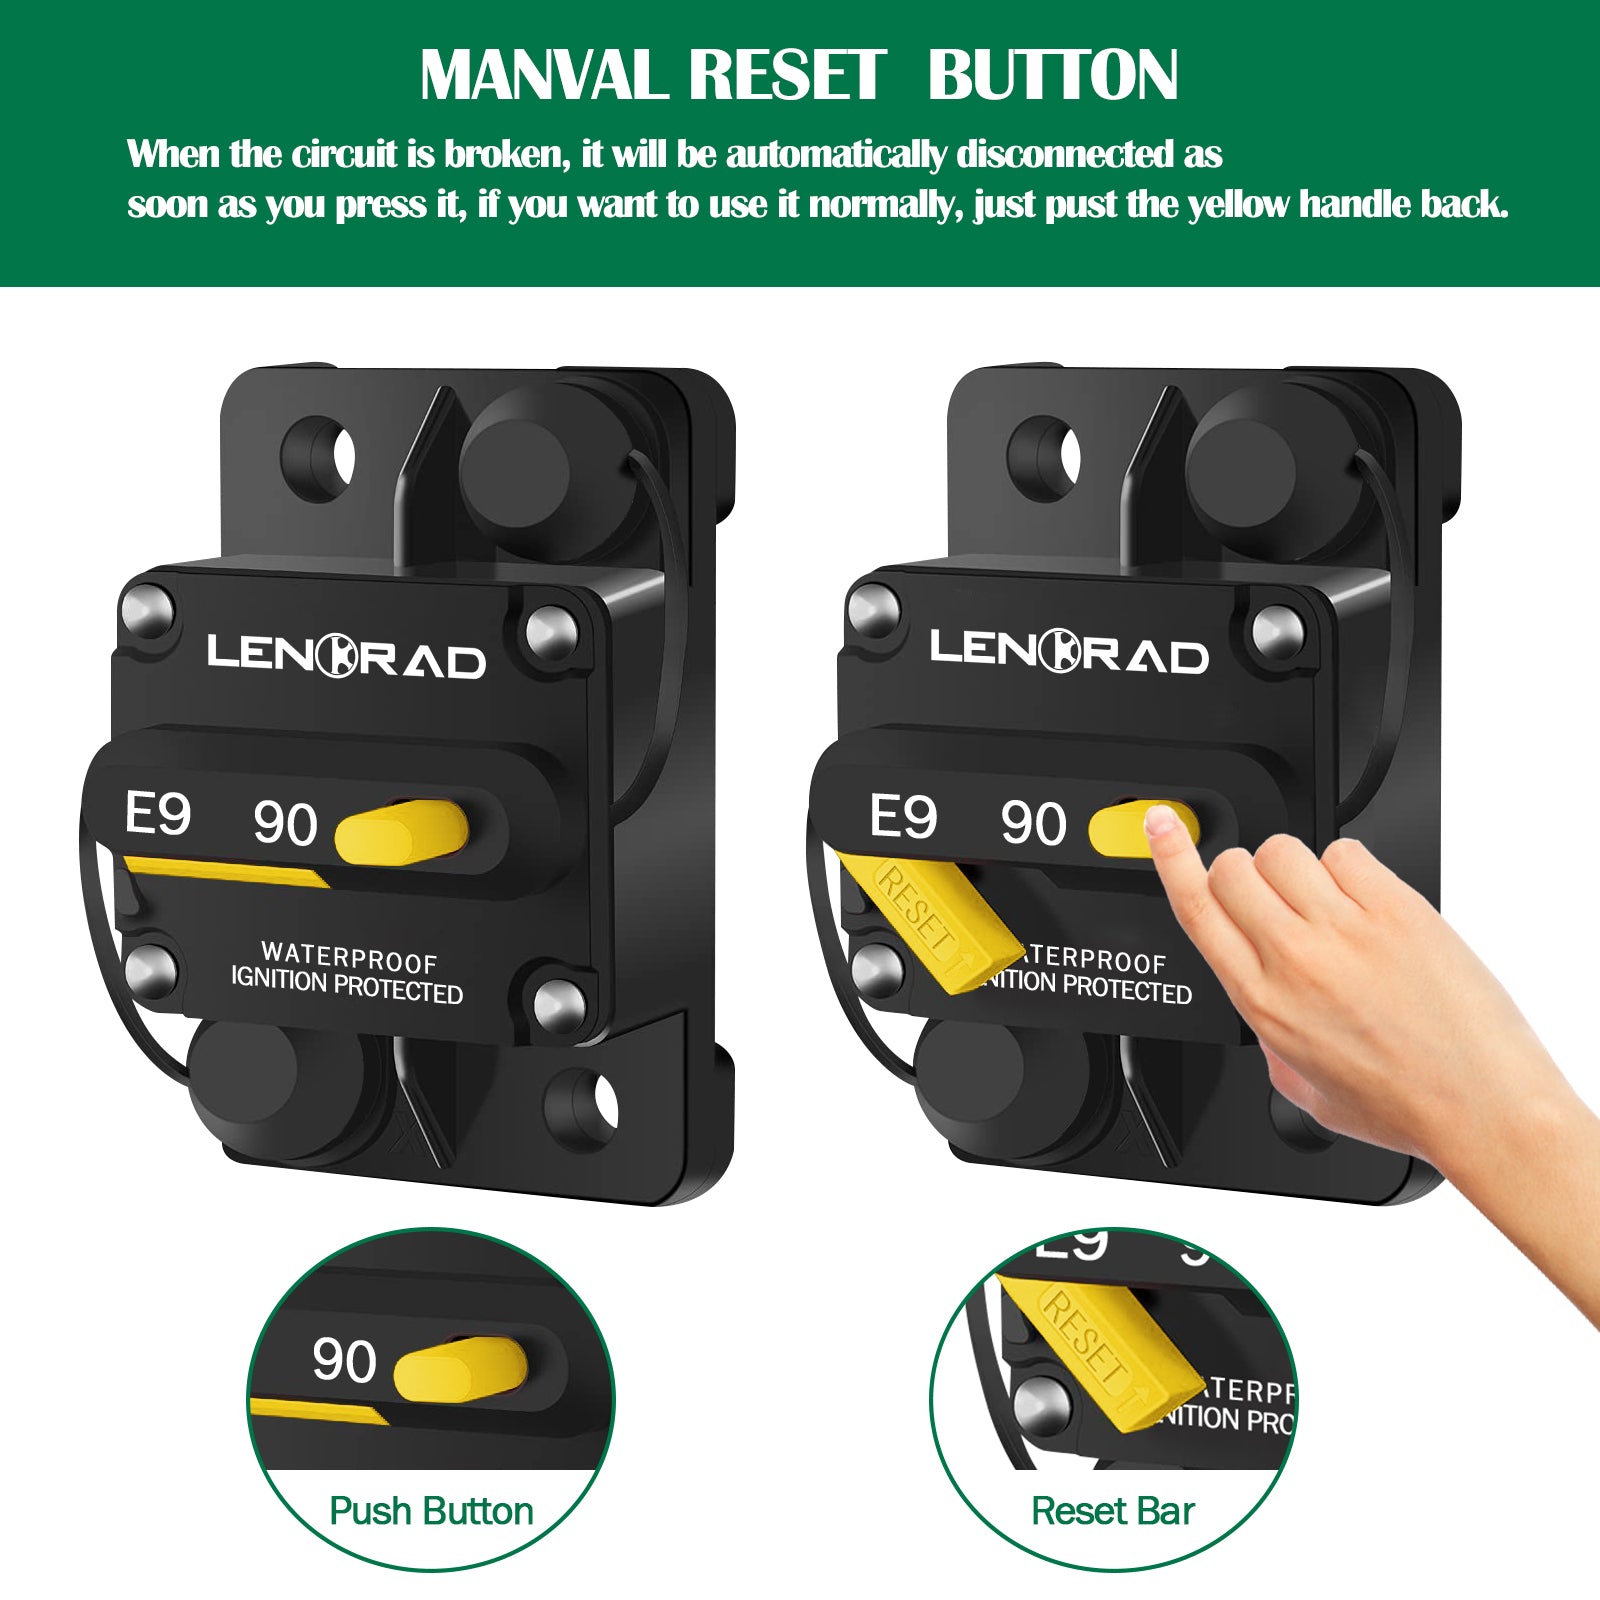 LENKRAD 90 Amp Circuit Breaker 12V with Manual Reset Switch Button for Boat Marine RV Yacht, Boat Circuit Breakers 12V - 48V DC, Waterproof(Surface Mount) - THALASSA